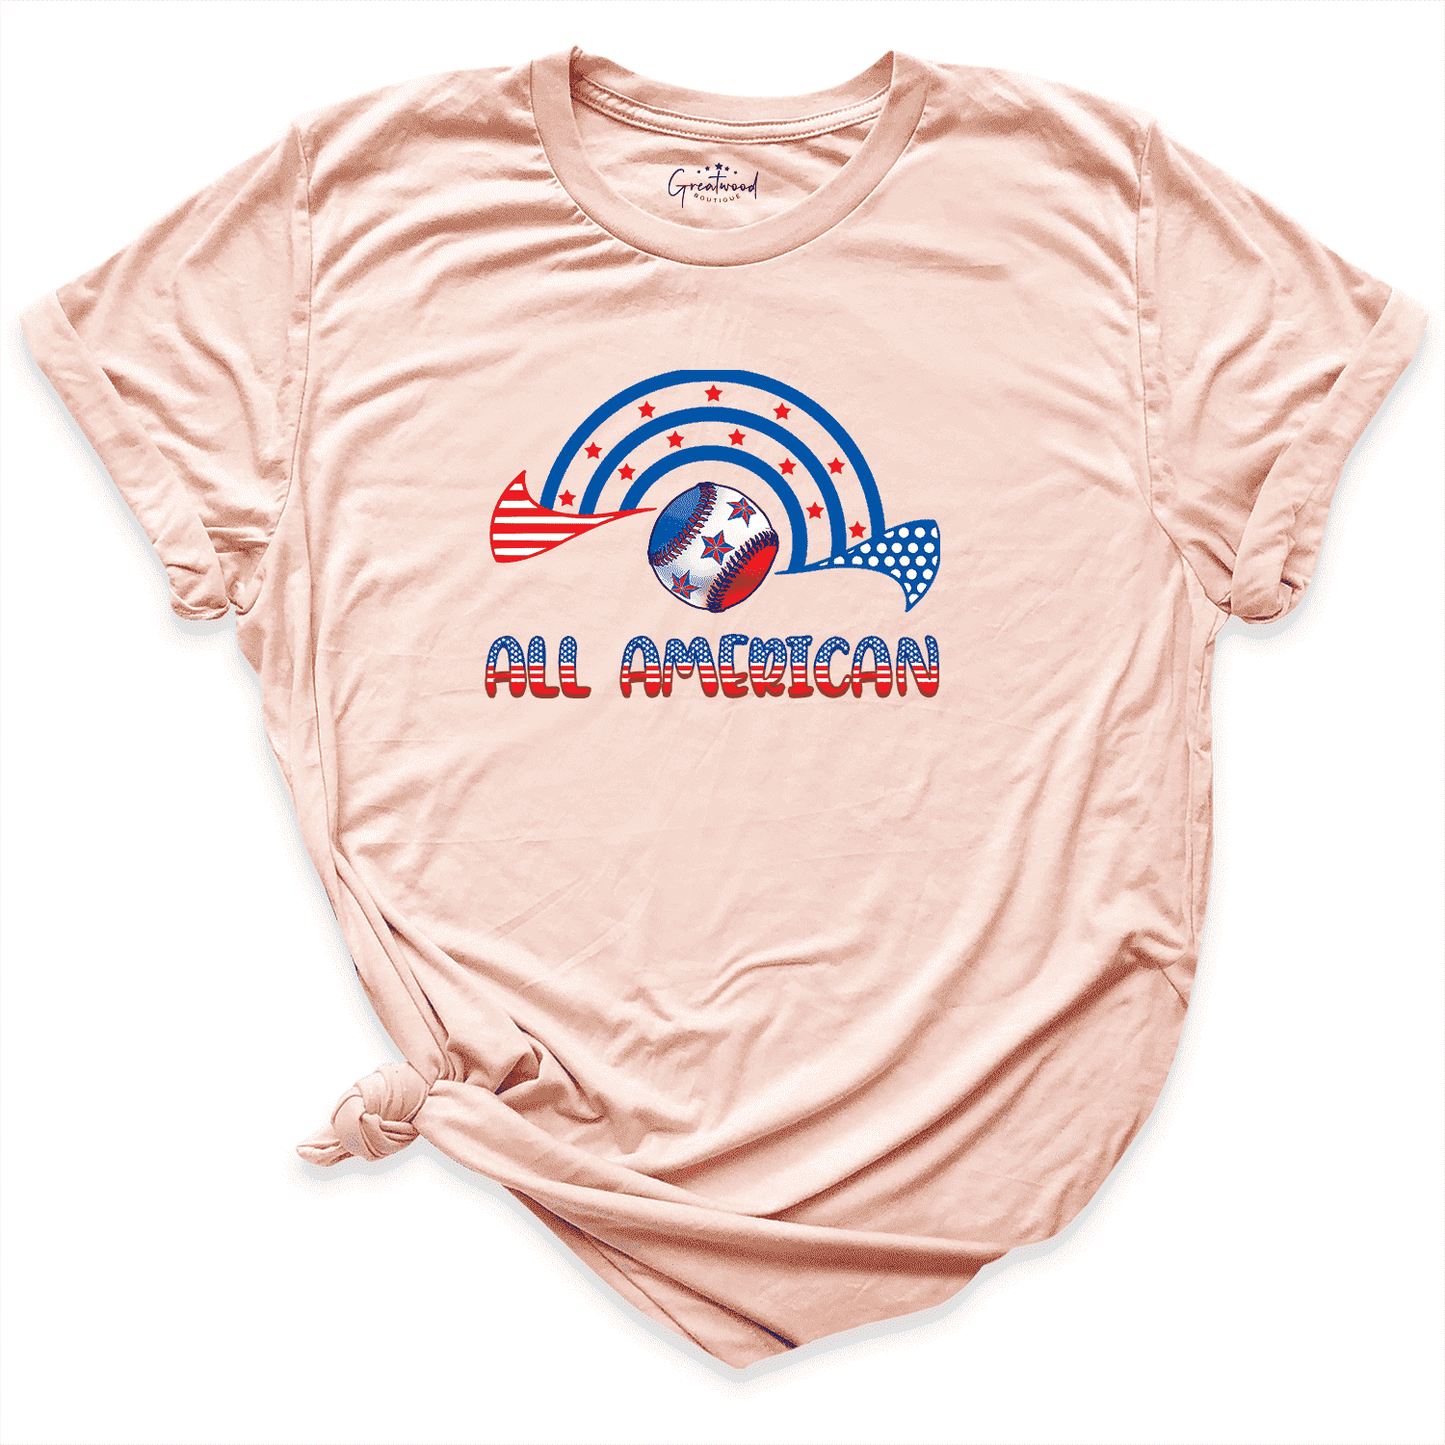 All American Baseball Shirt Peach - Greatwood Boutique